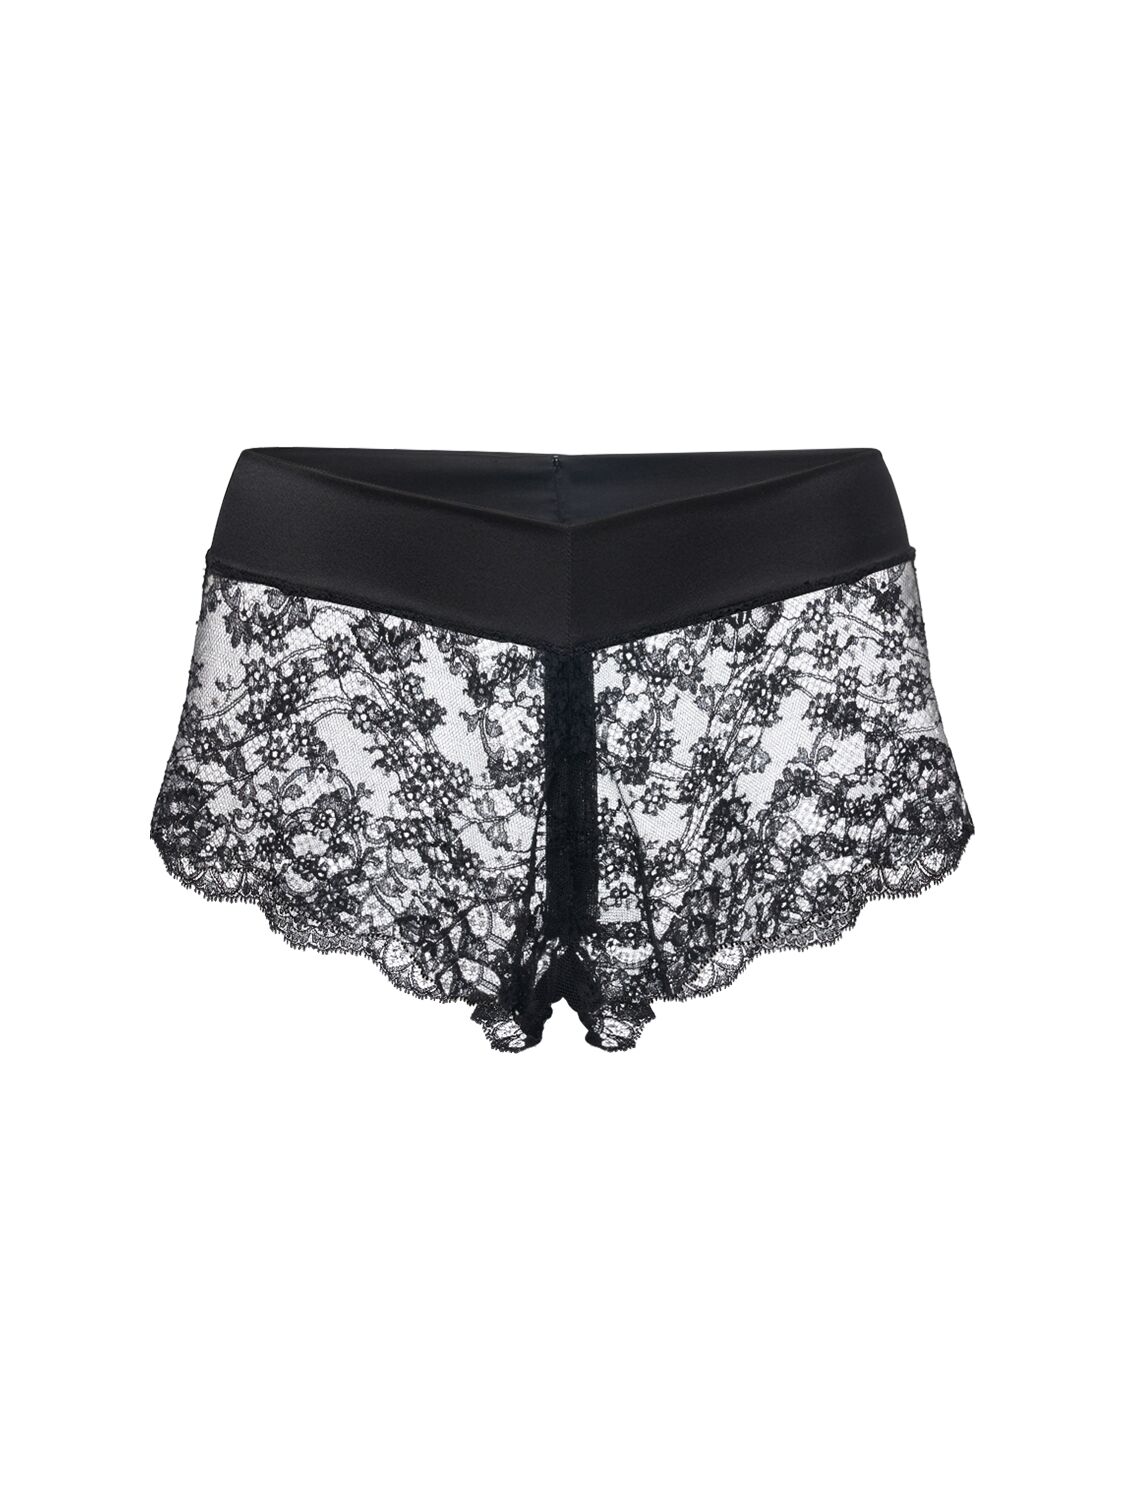 Dolce & Gabbana Stretch Chantilly Lace Shorts In Black